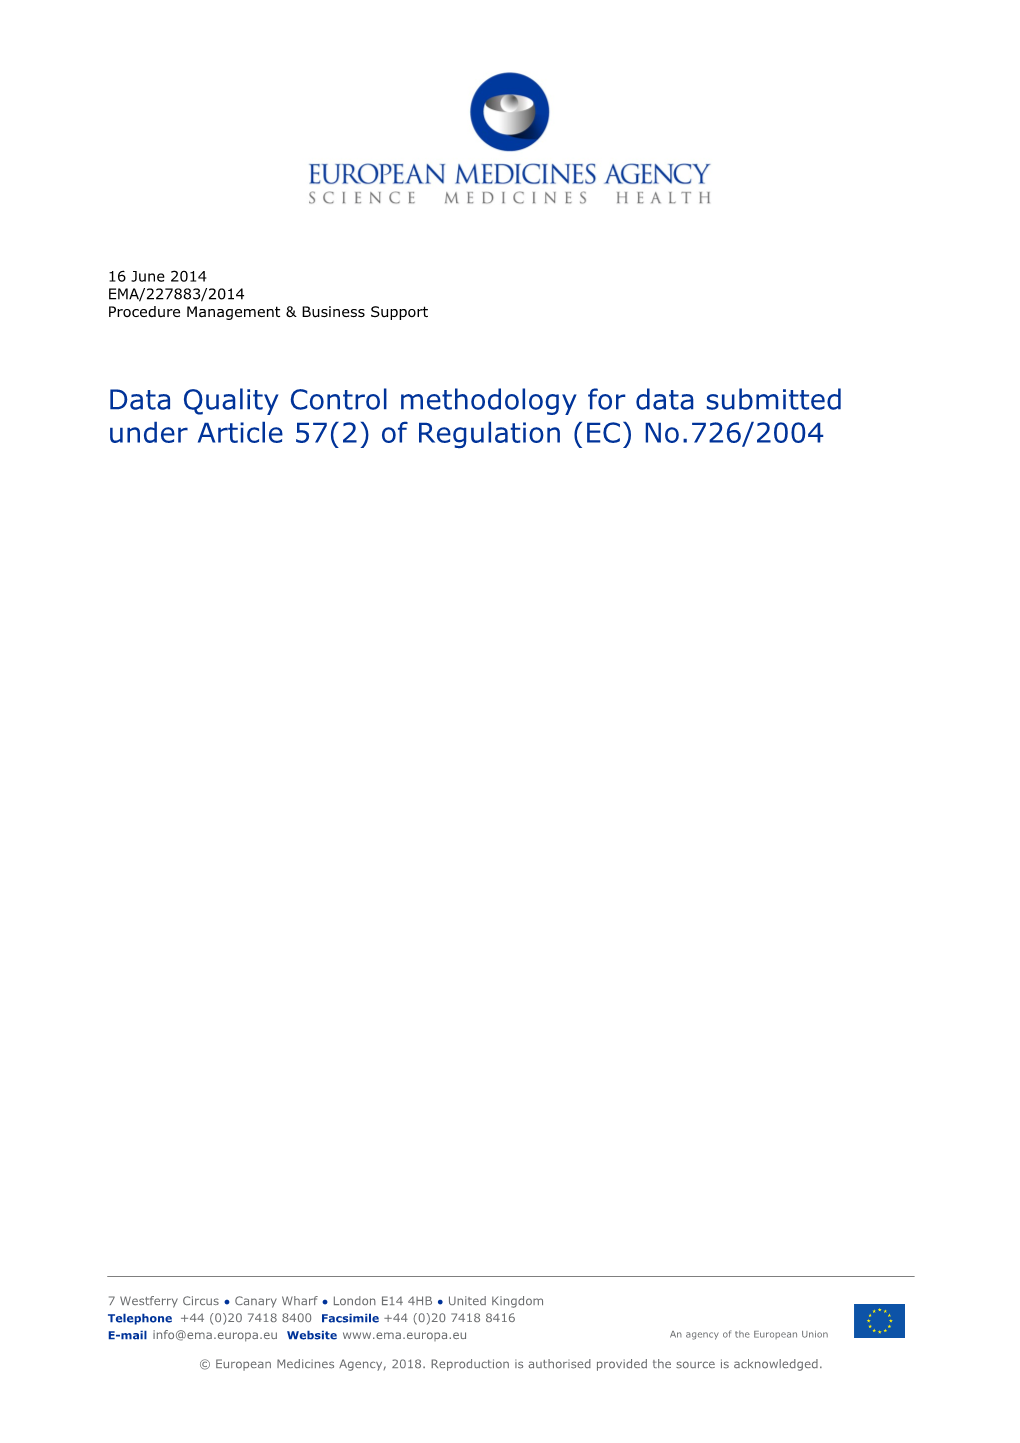 FINAL Article 57 Data Quality Control Methodology